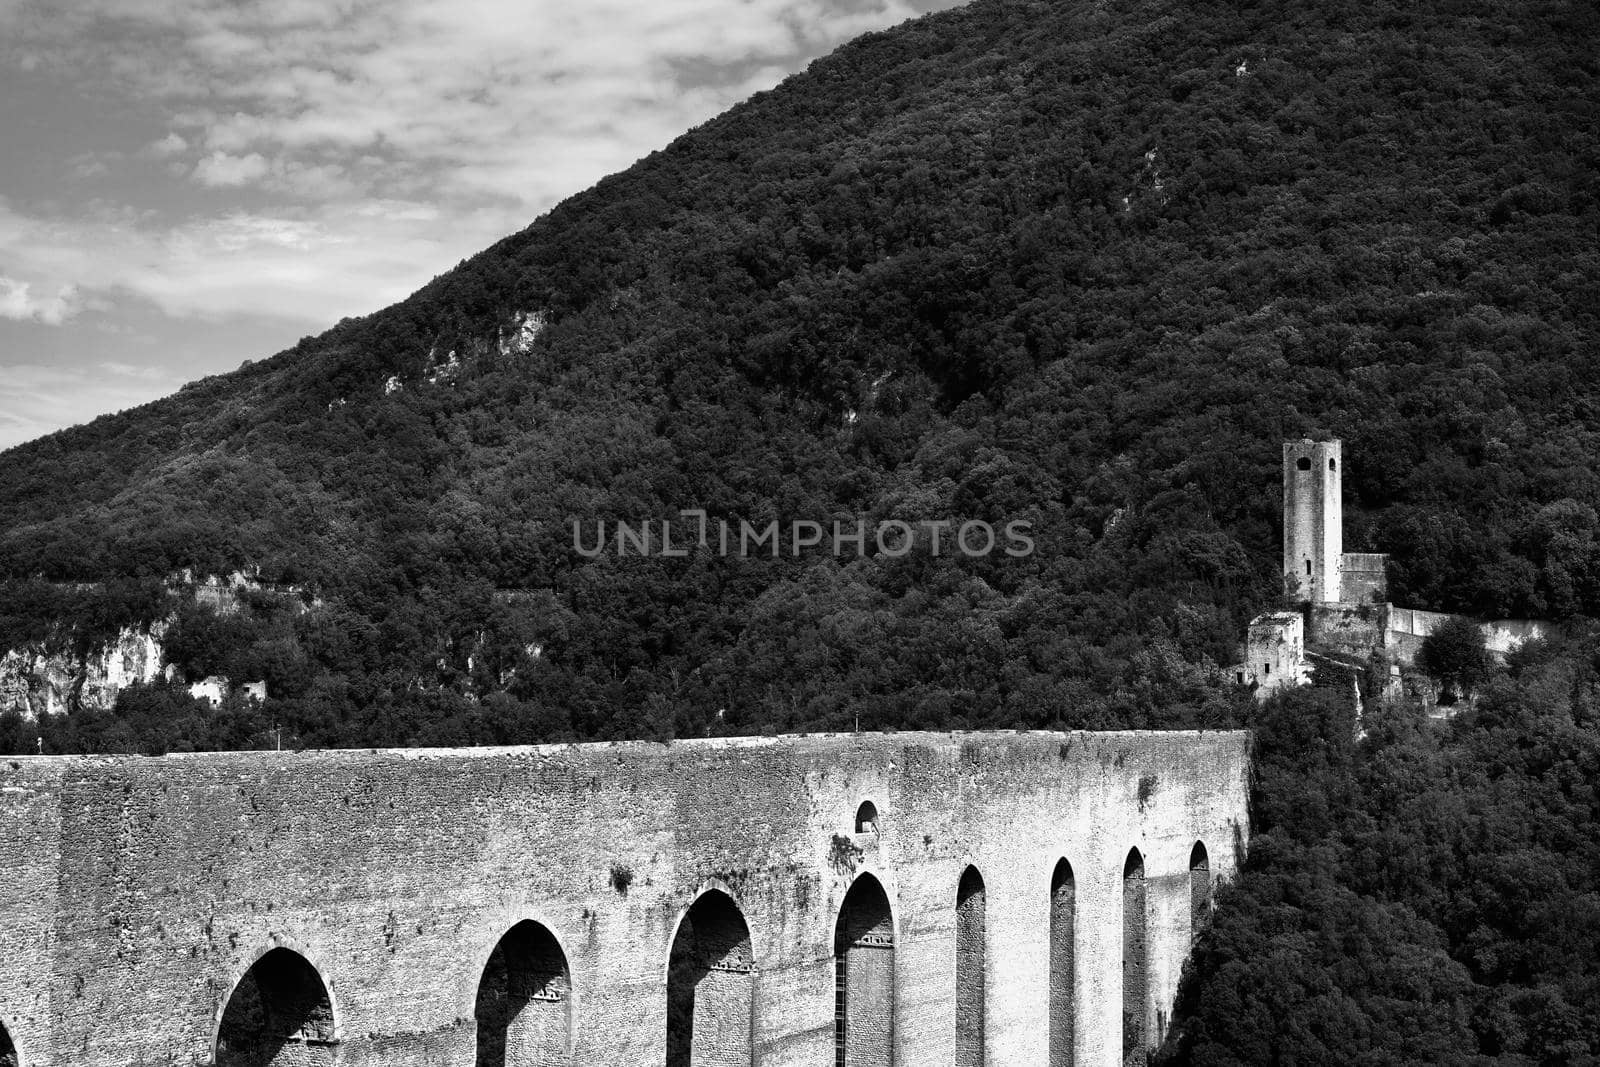 Spoleto , Italy , Ponte delle Torri in black and white  , arched  bridge of towers  in limestone , it worked as aqueduct and bridge